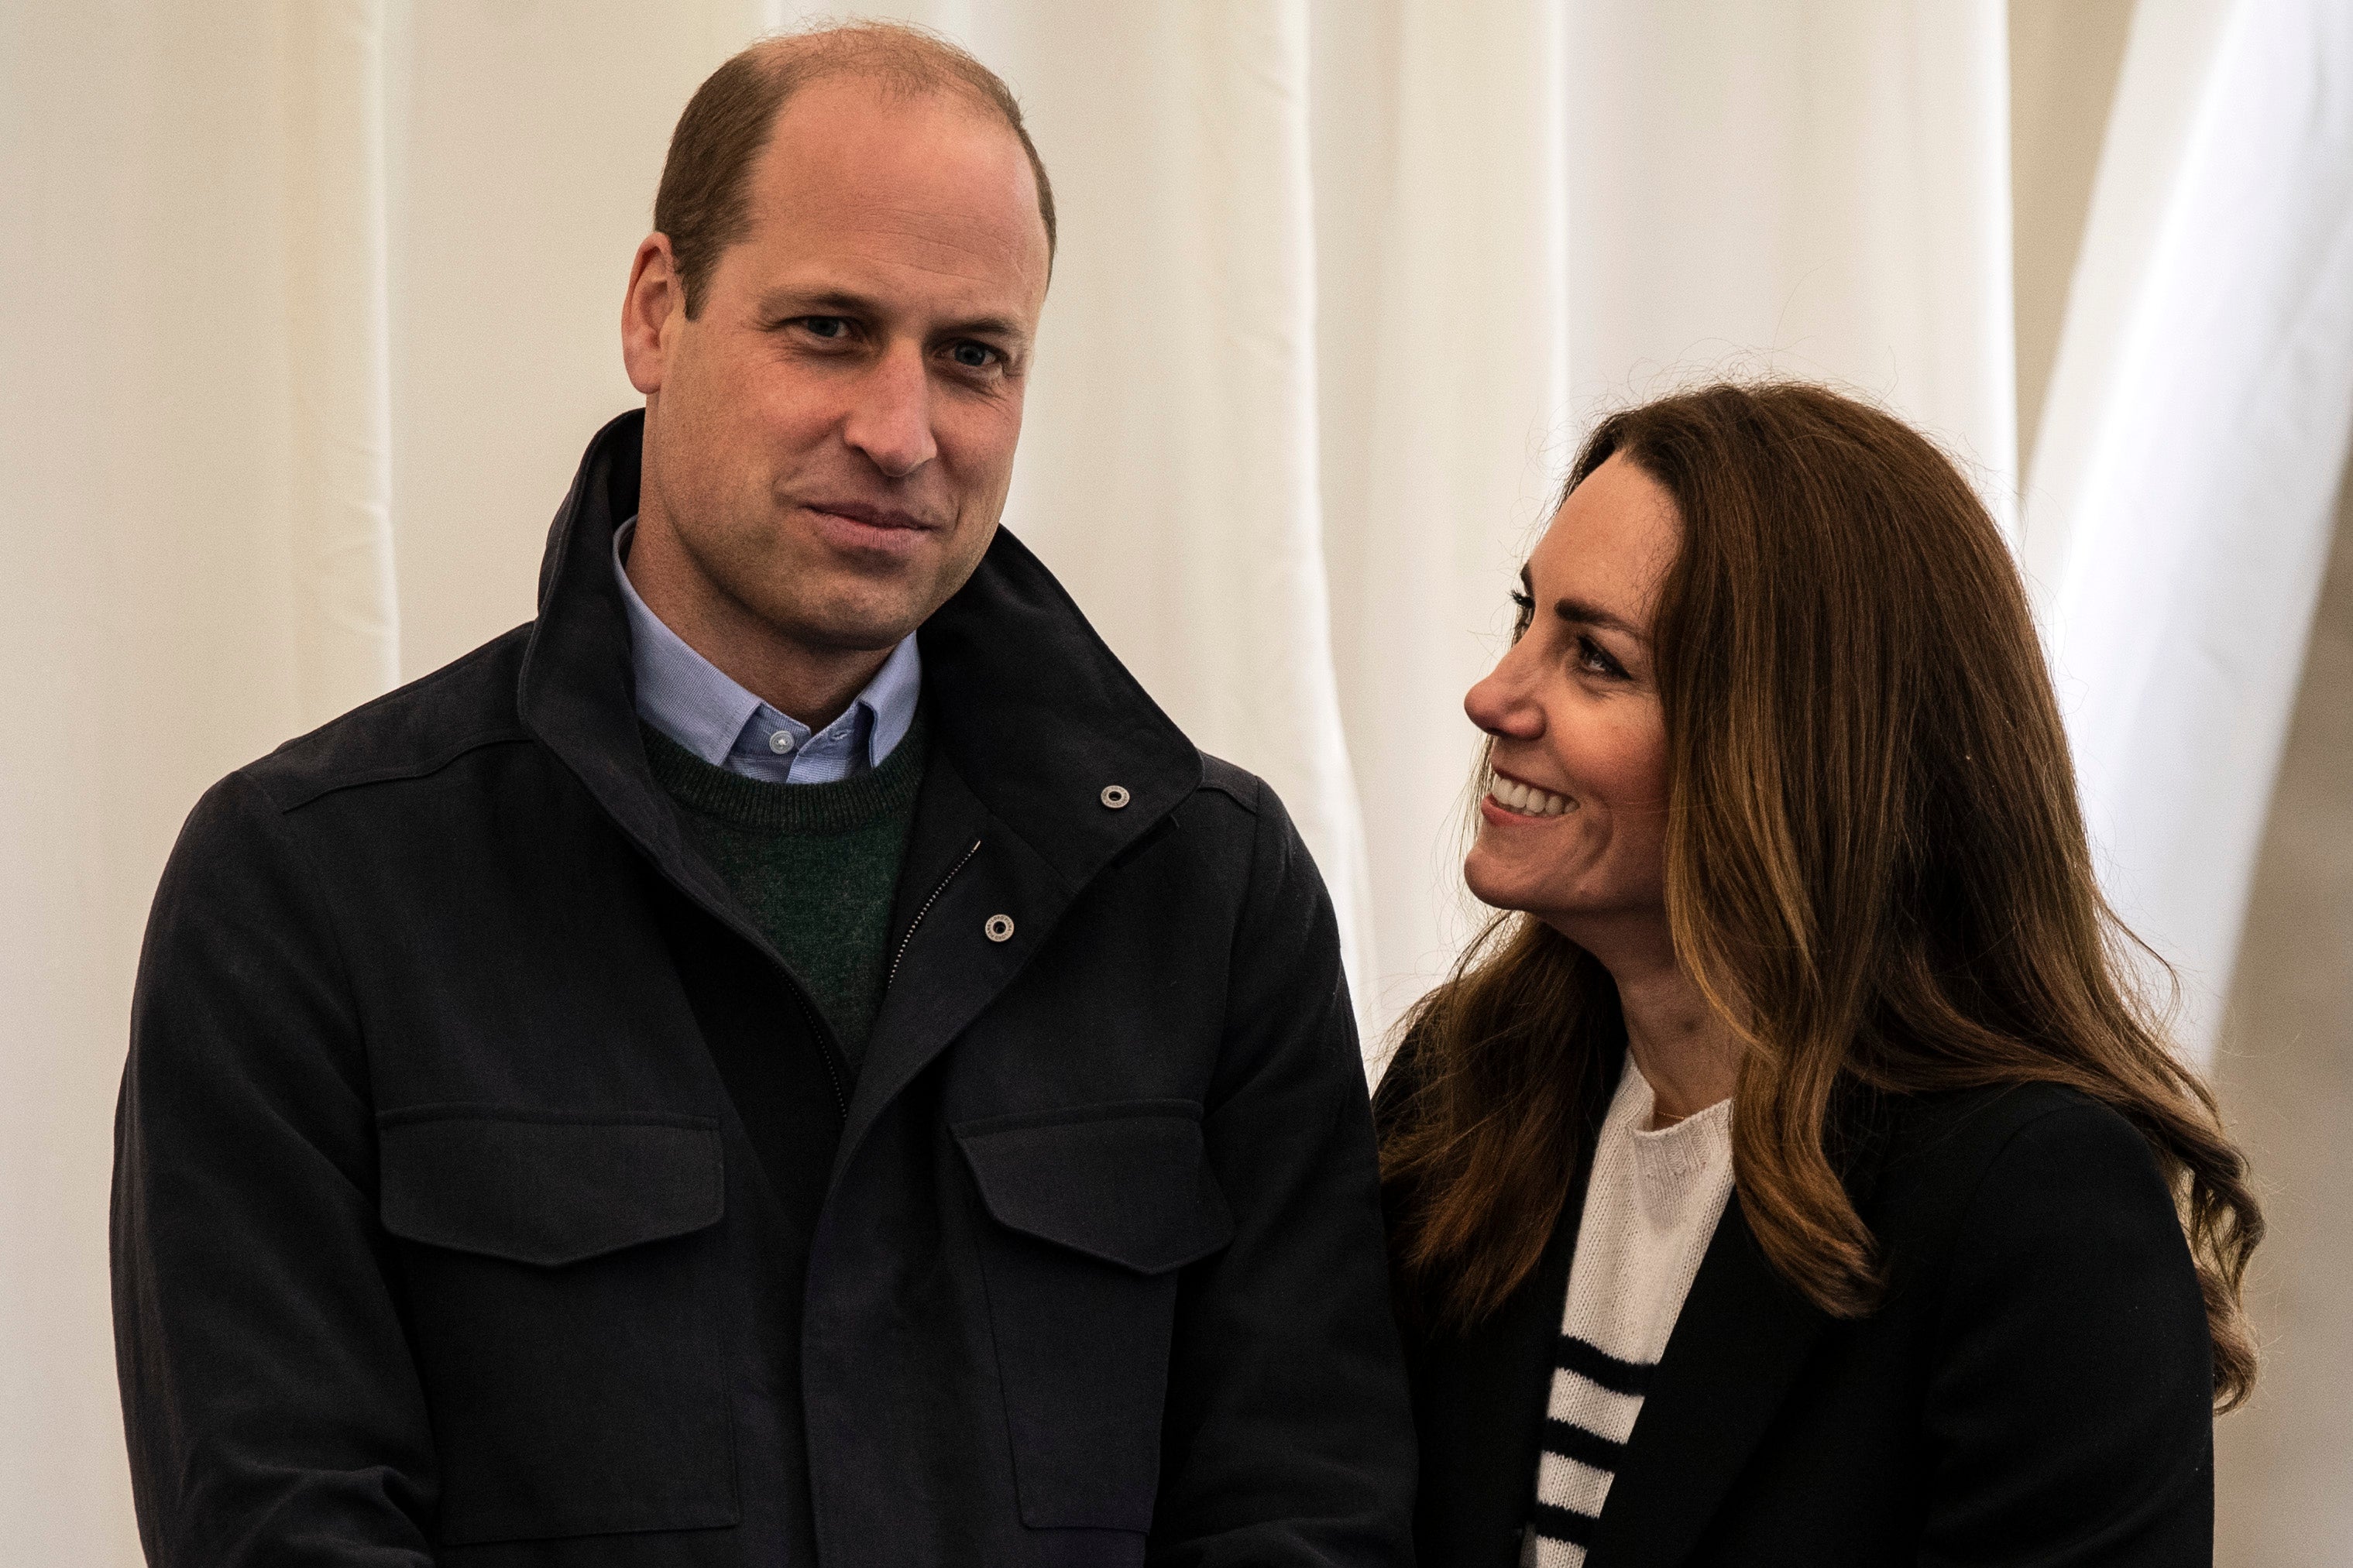 Prince William and Catherine meet students during a visit to the University of St Andrews on May 26, 2021